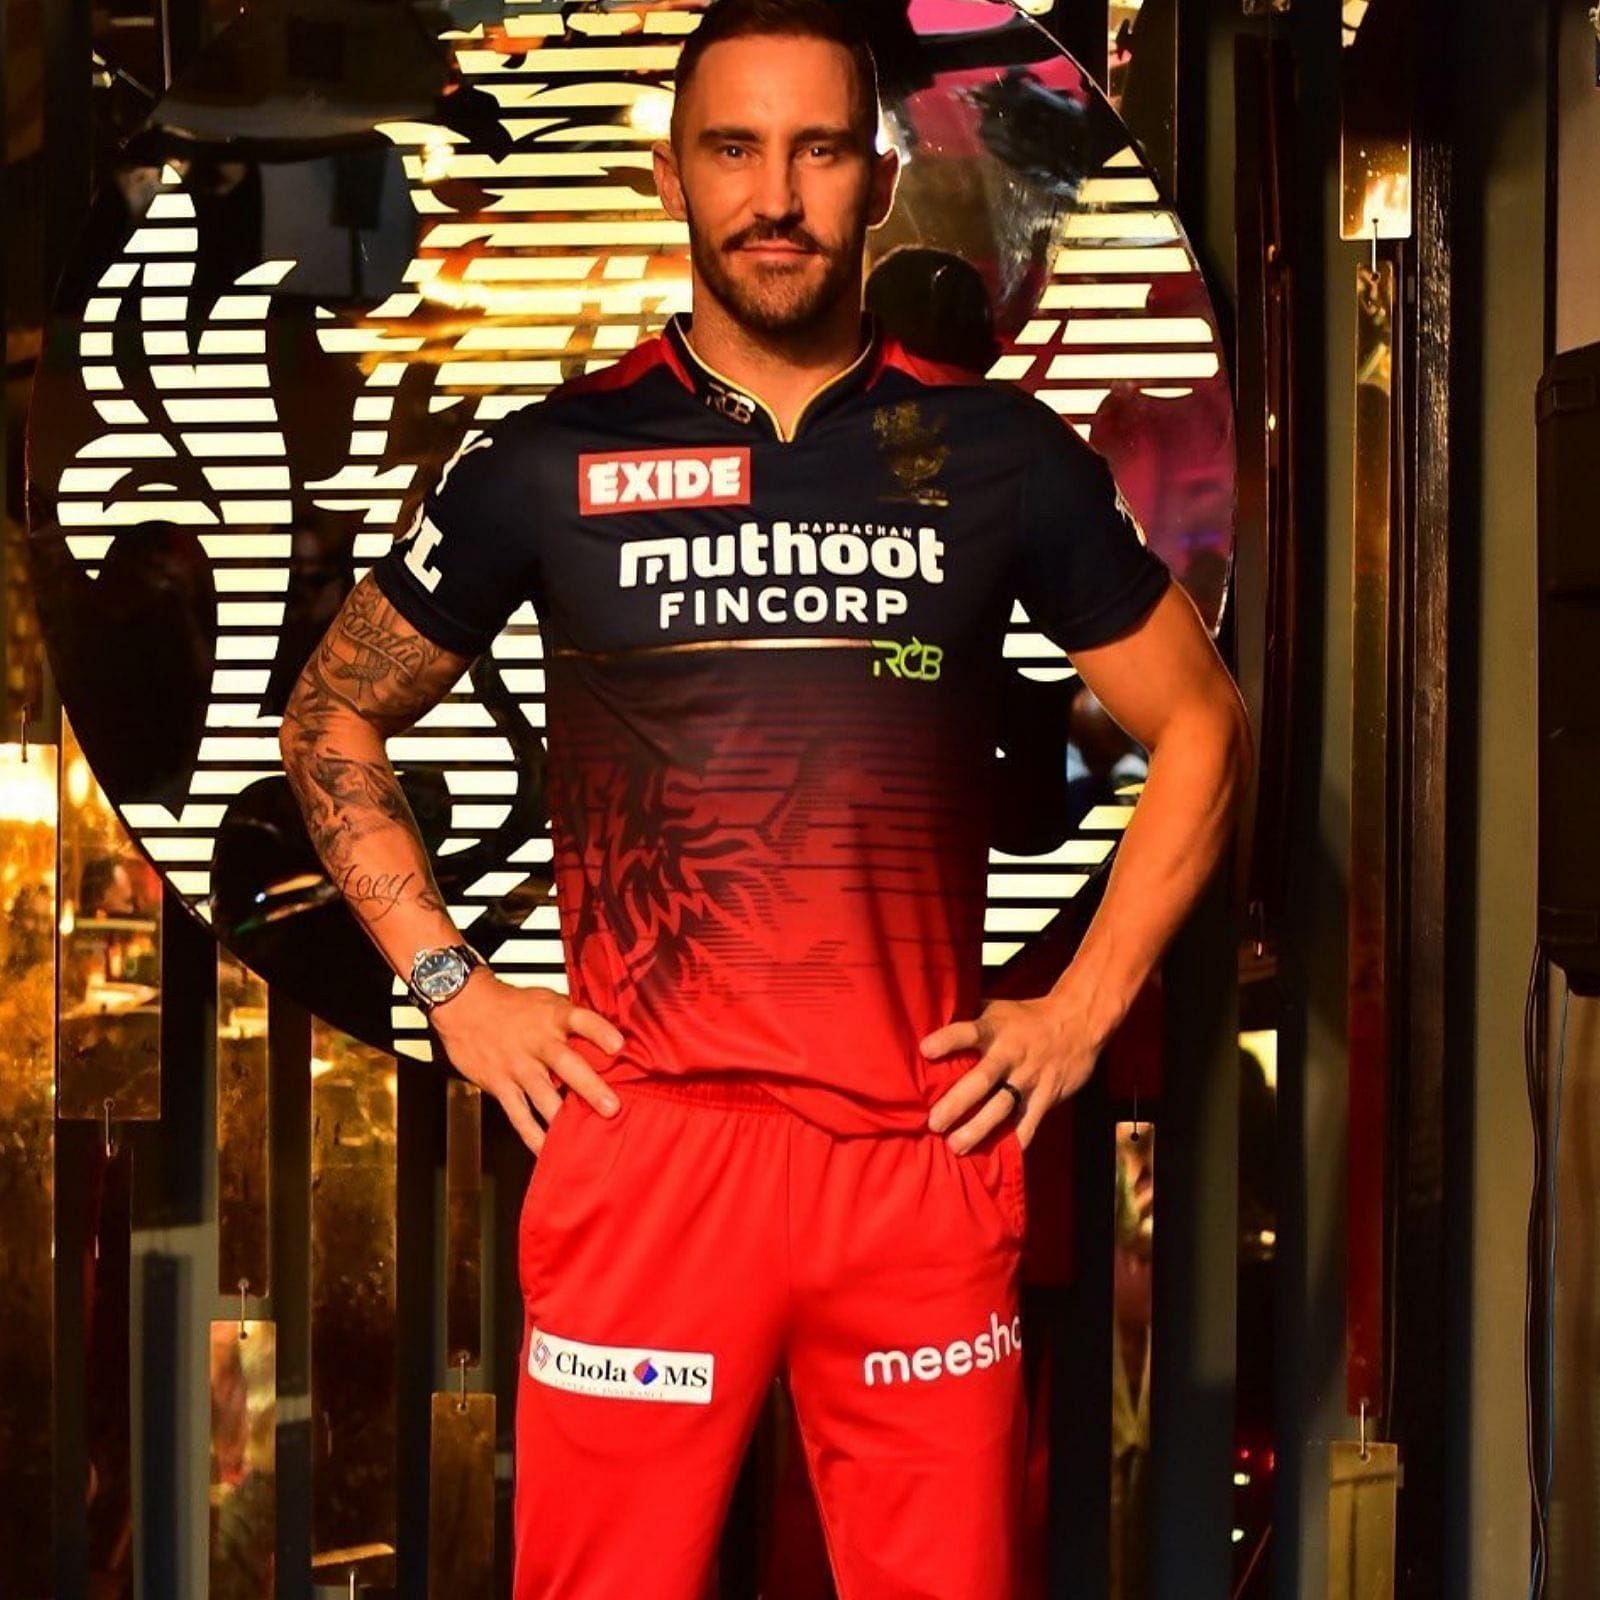 rcb-launch-their-jersey-for-ipl-2022.jpg (1600&times;1600)